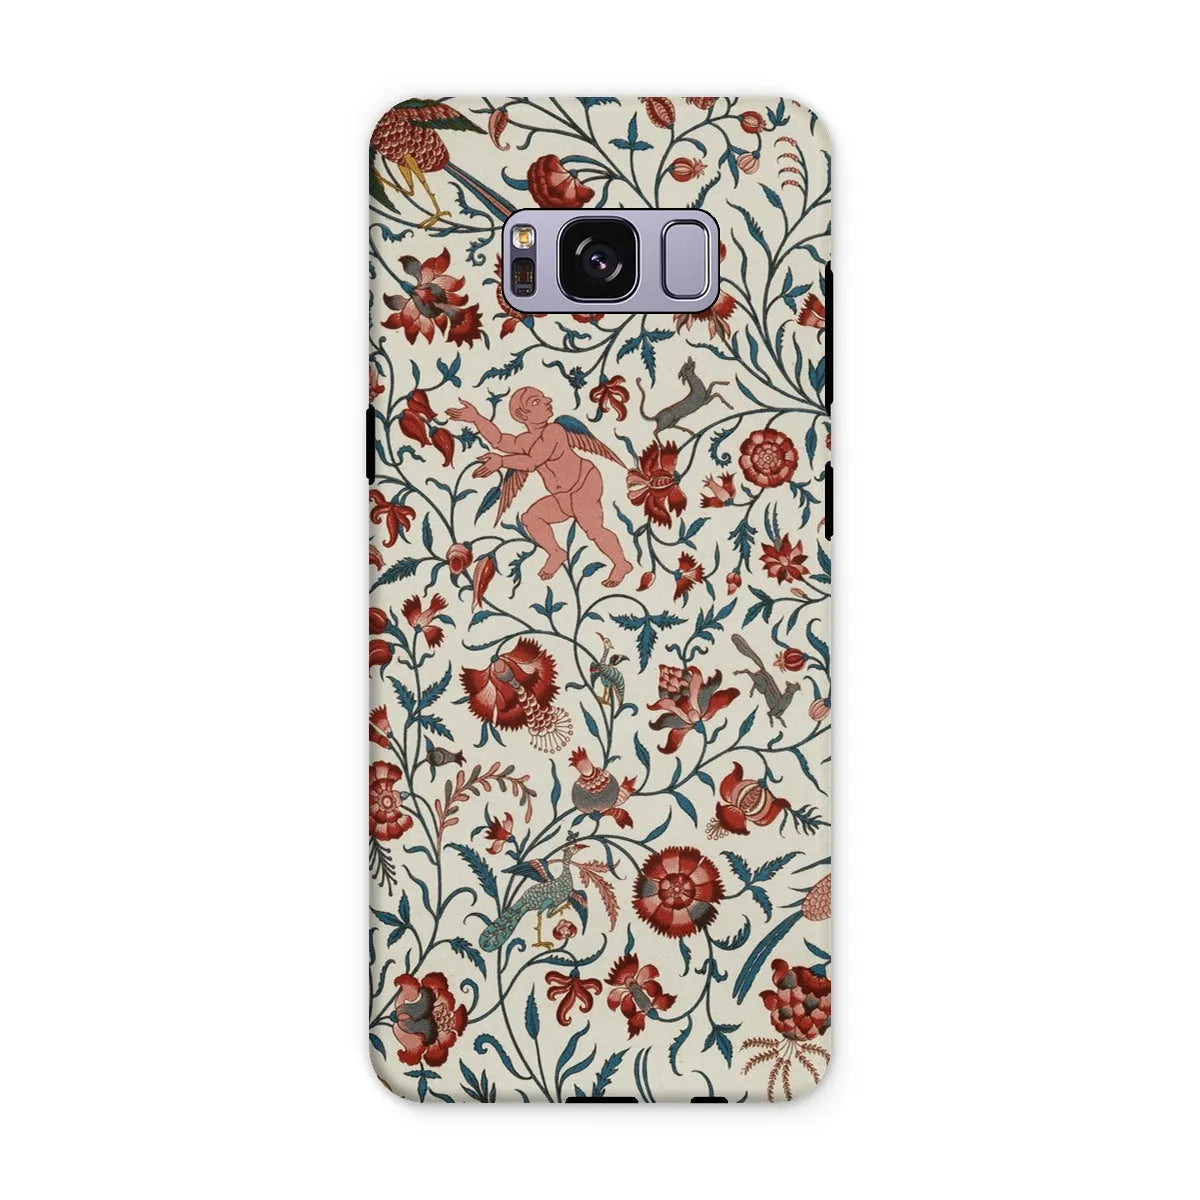 Persian Pattern From L’ornement Polychrome By Auguste Racinet Tough Phone Case - Samsung Galaxy S8 Plus / Matte